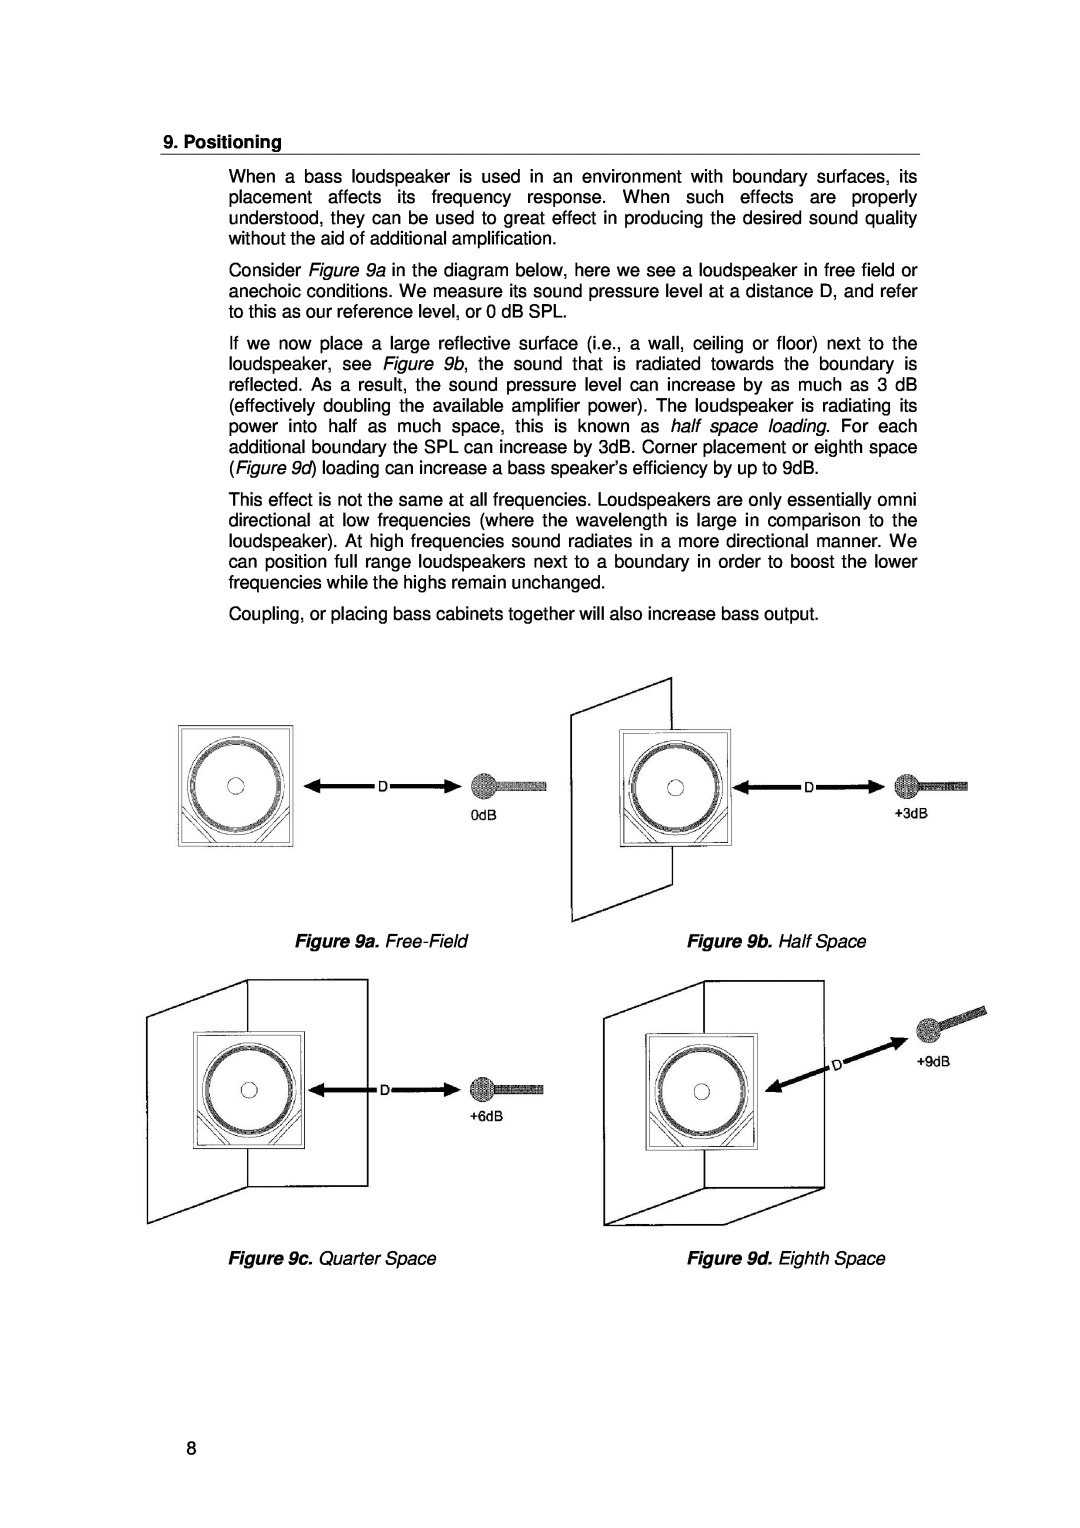 Tannoy B475 user manual Positioning, a. Free-Field, b. Half Space, c. Quarter Space, d. Eighth Space 